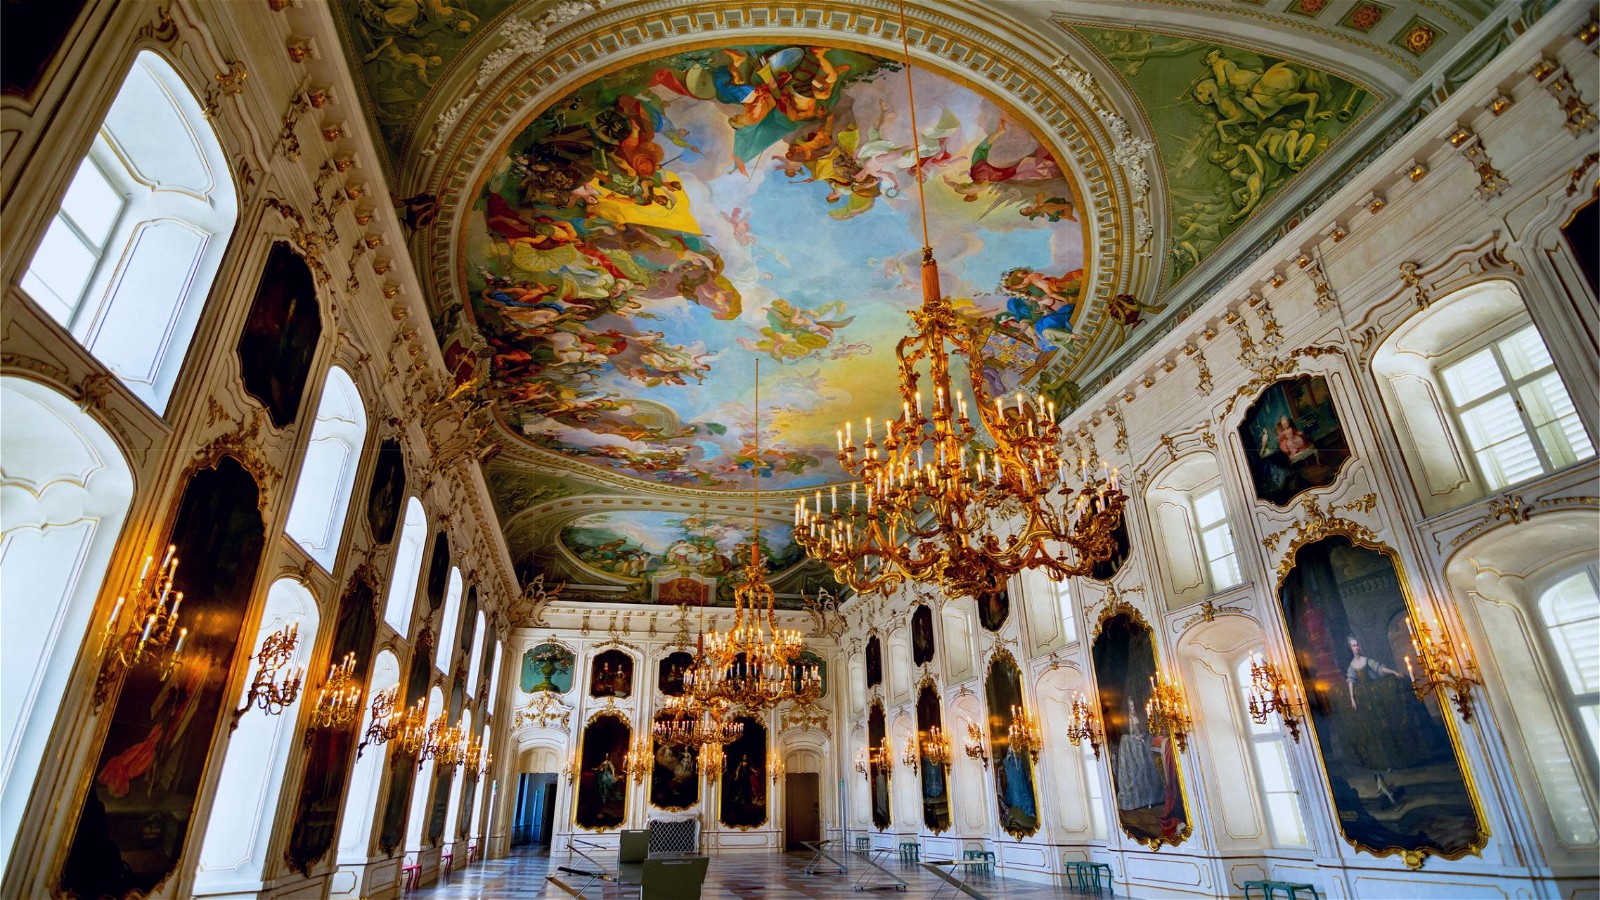 Imperial Palace (Hofburg): Explore the Imperial Palace, which was once the residence of the Habsburg rulers. Admire the opulent Imperial Apartments, the beautifully decorated Imperial Chapel, and the stunning Renaissance courtyard. 